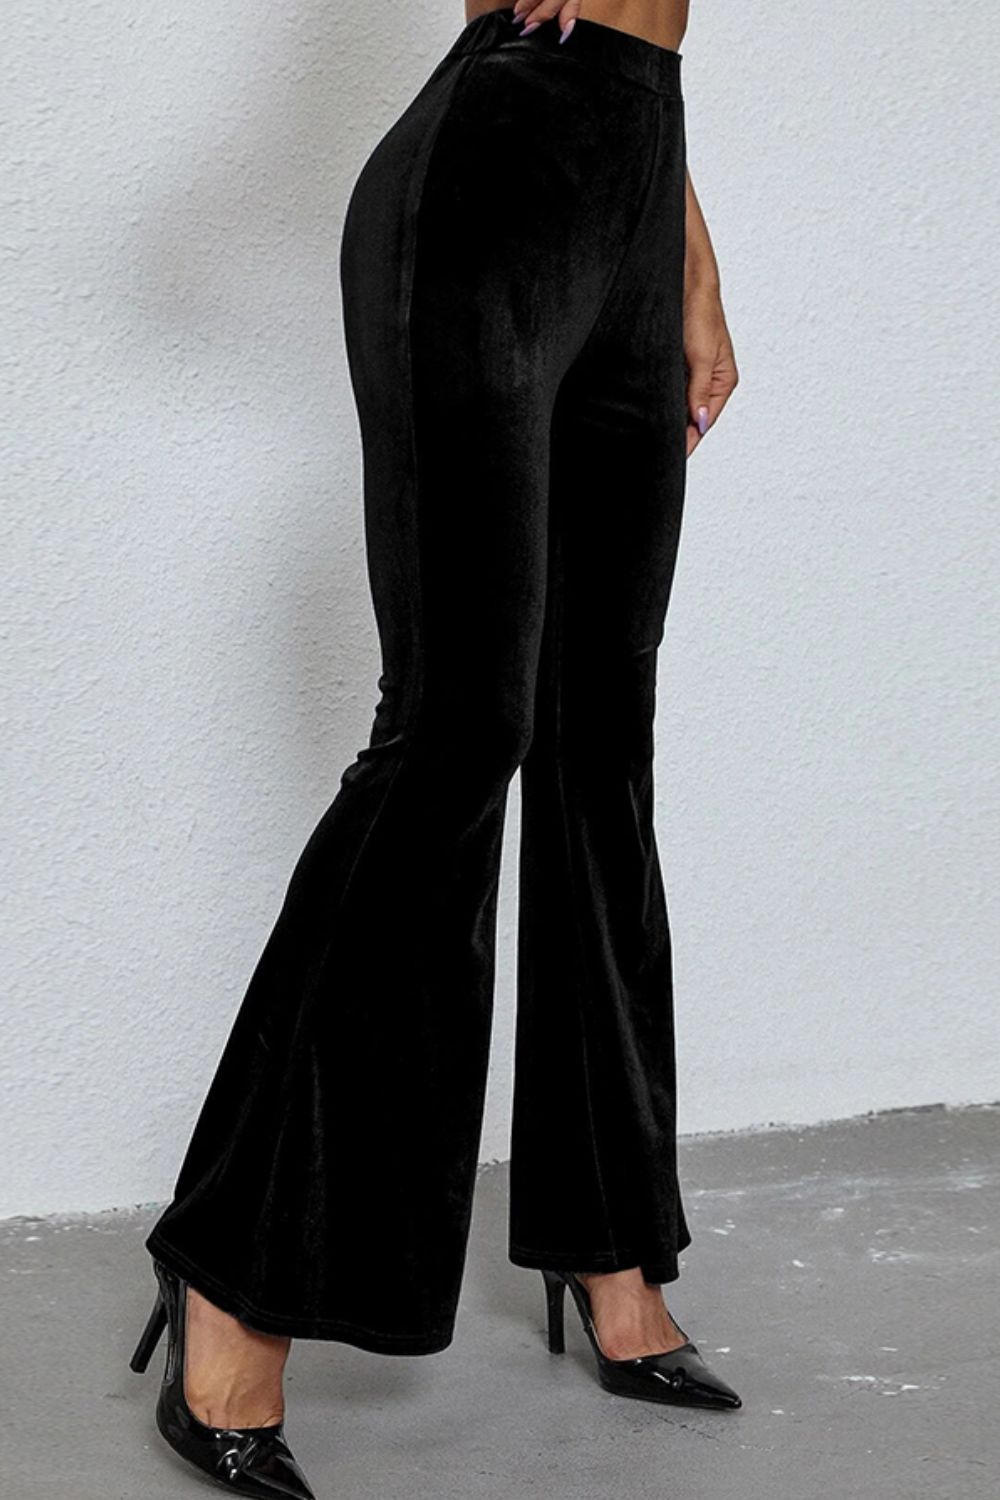 Snake Charmer High Waist Stretch Pants in Vibrant Black Faux Leather